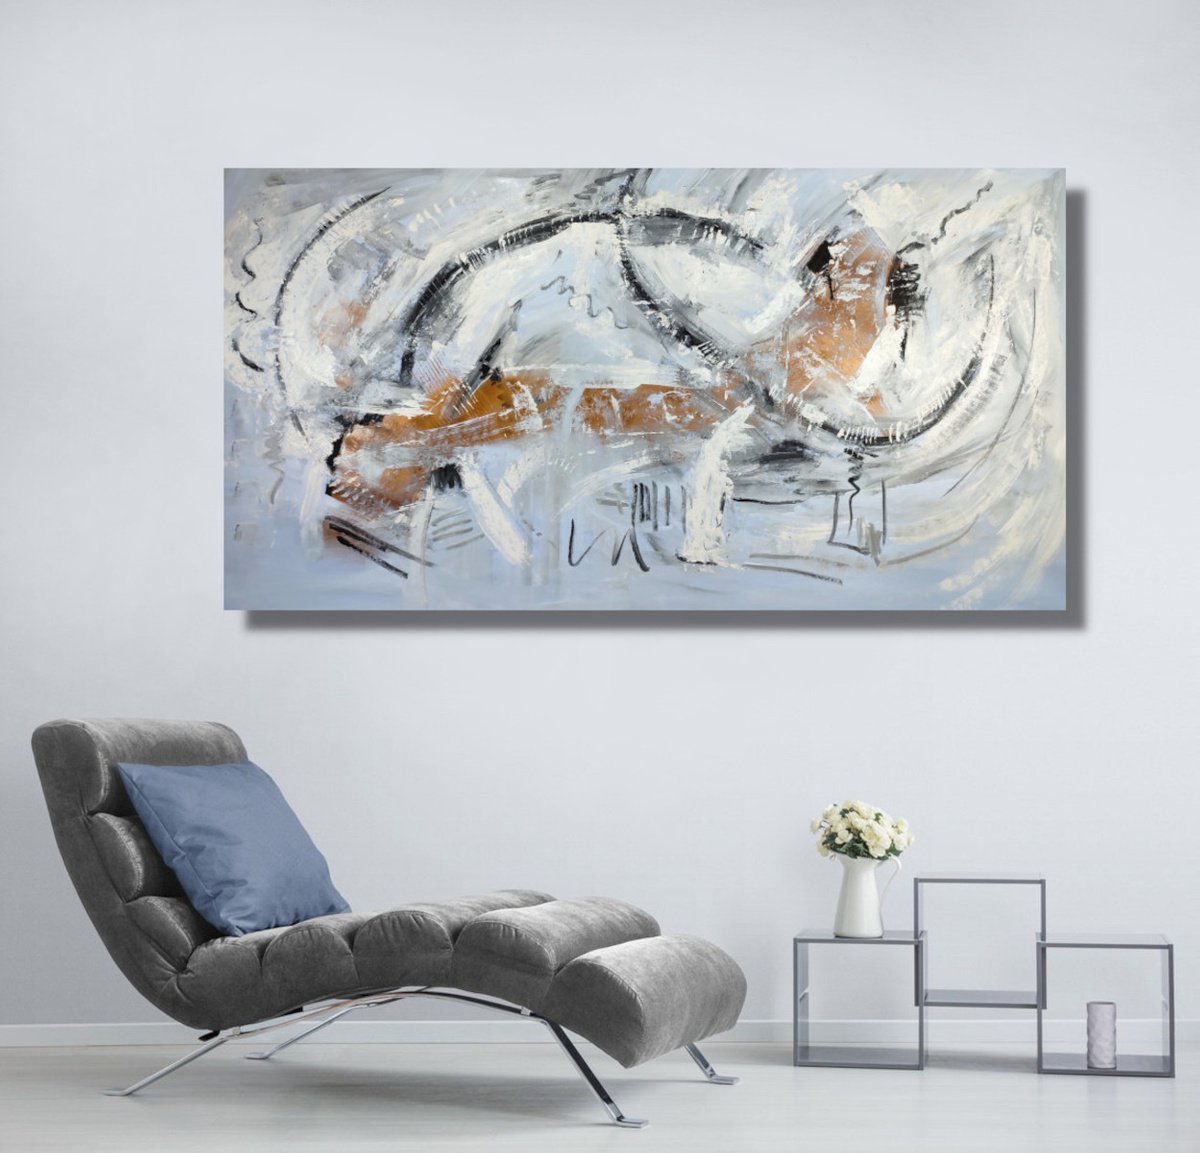 large abstract painting-xxl-200x100-large wall art canvas-cm-title-c769 by Sauro Bos